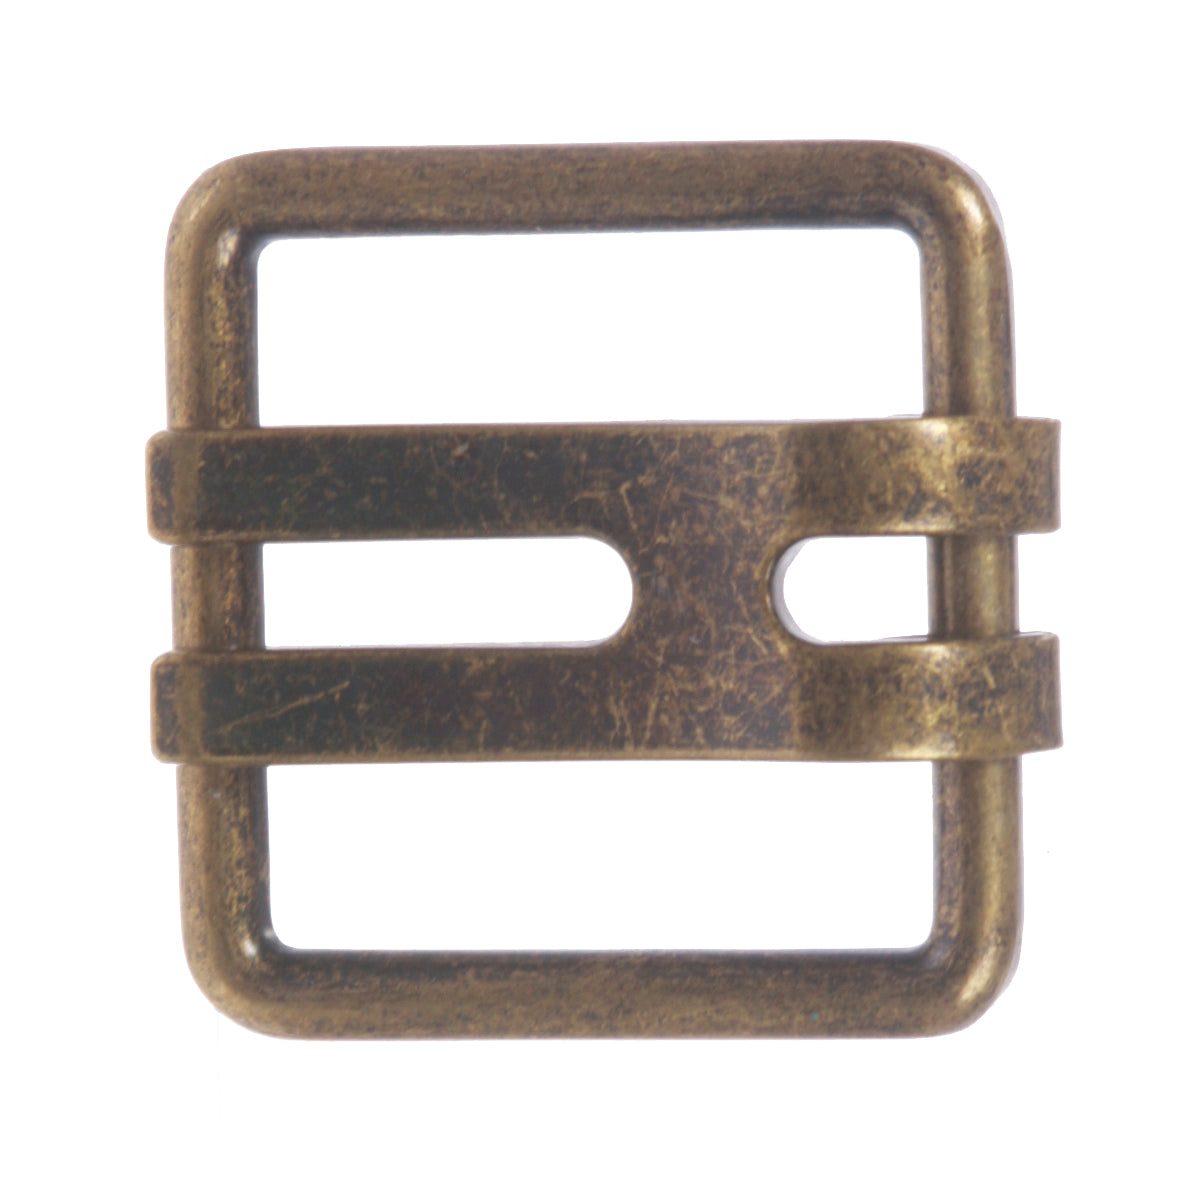 1 3/4" Double Wide Flat Prong Square Belt Buckle